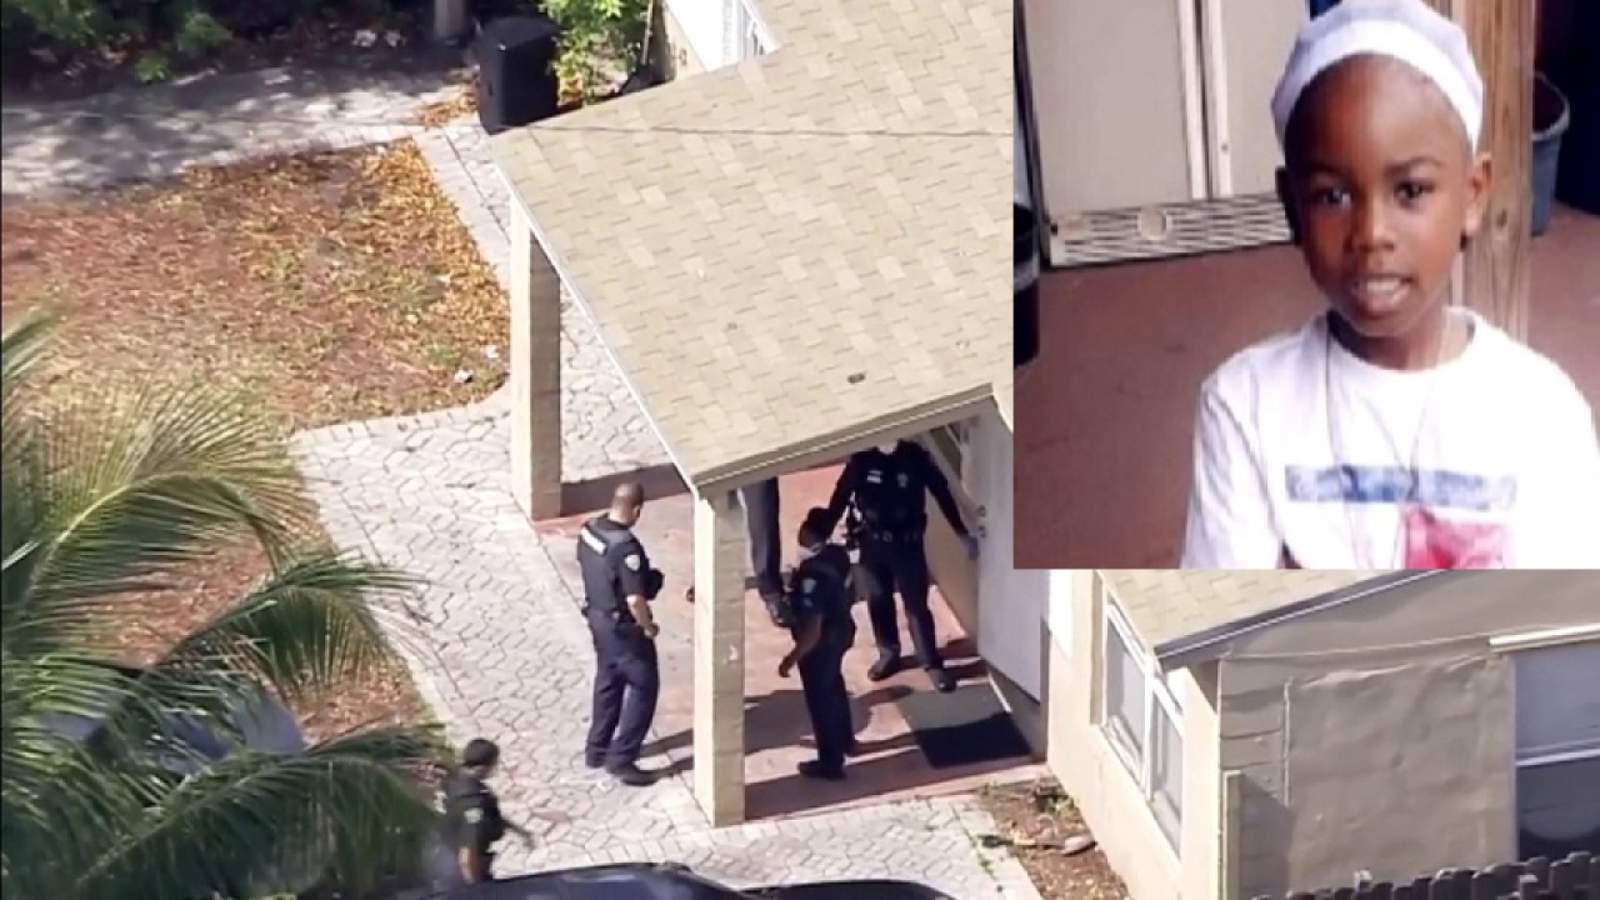 Details emerge on how 7-year-old Fort Lauderdale boy was shot in head